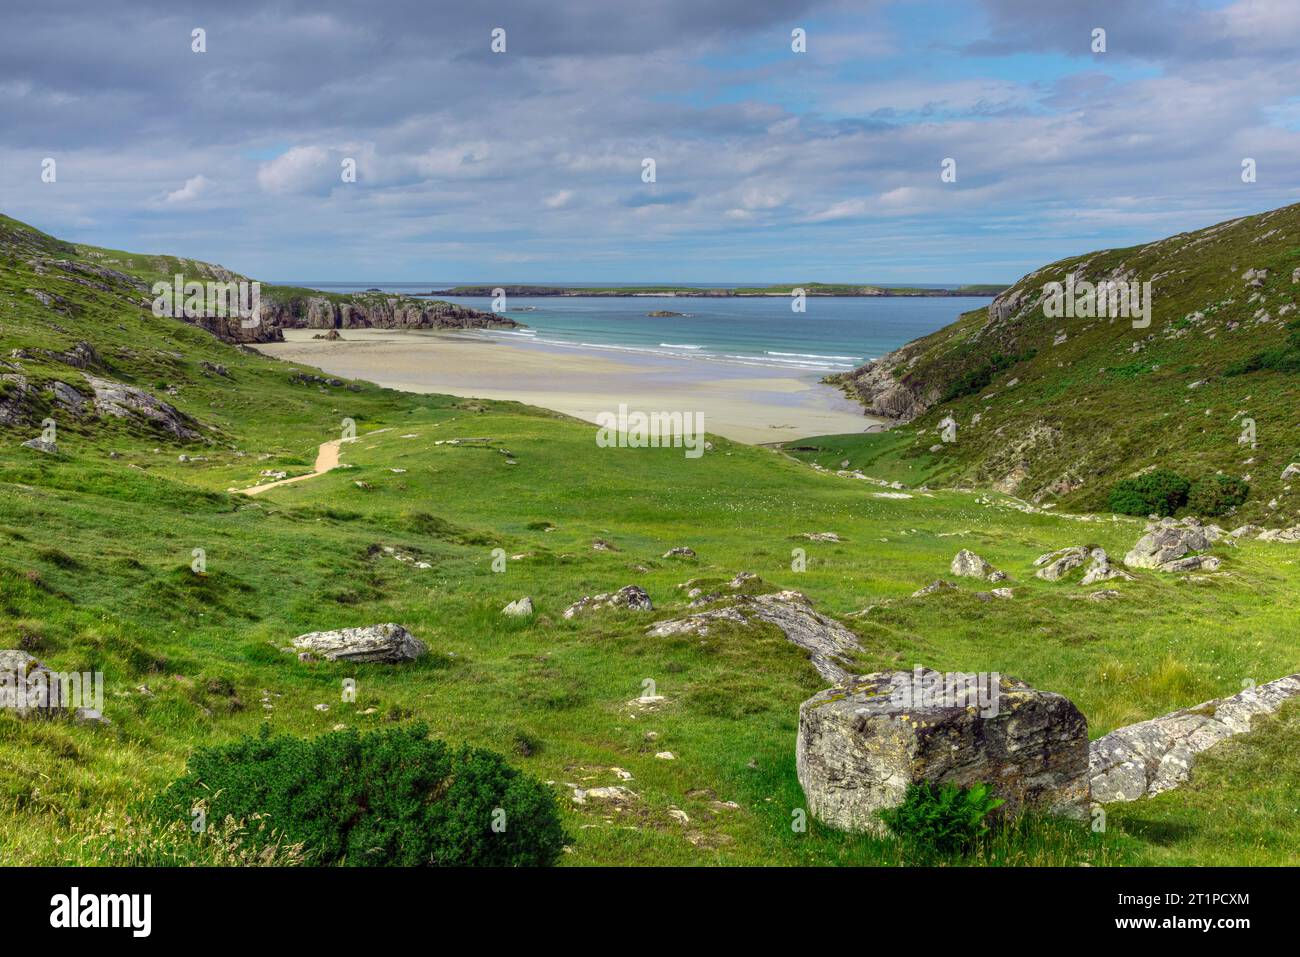 Ceannabeinne Beach is a beautiful, white sandy beach with rocky outcrops and crystal clear water. It is located on the North Coast 500, a scenic drivi Stock Photo